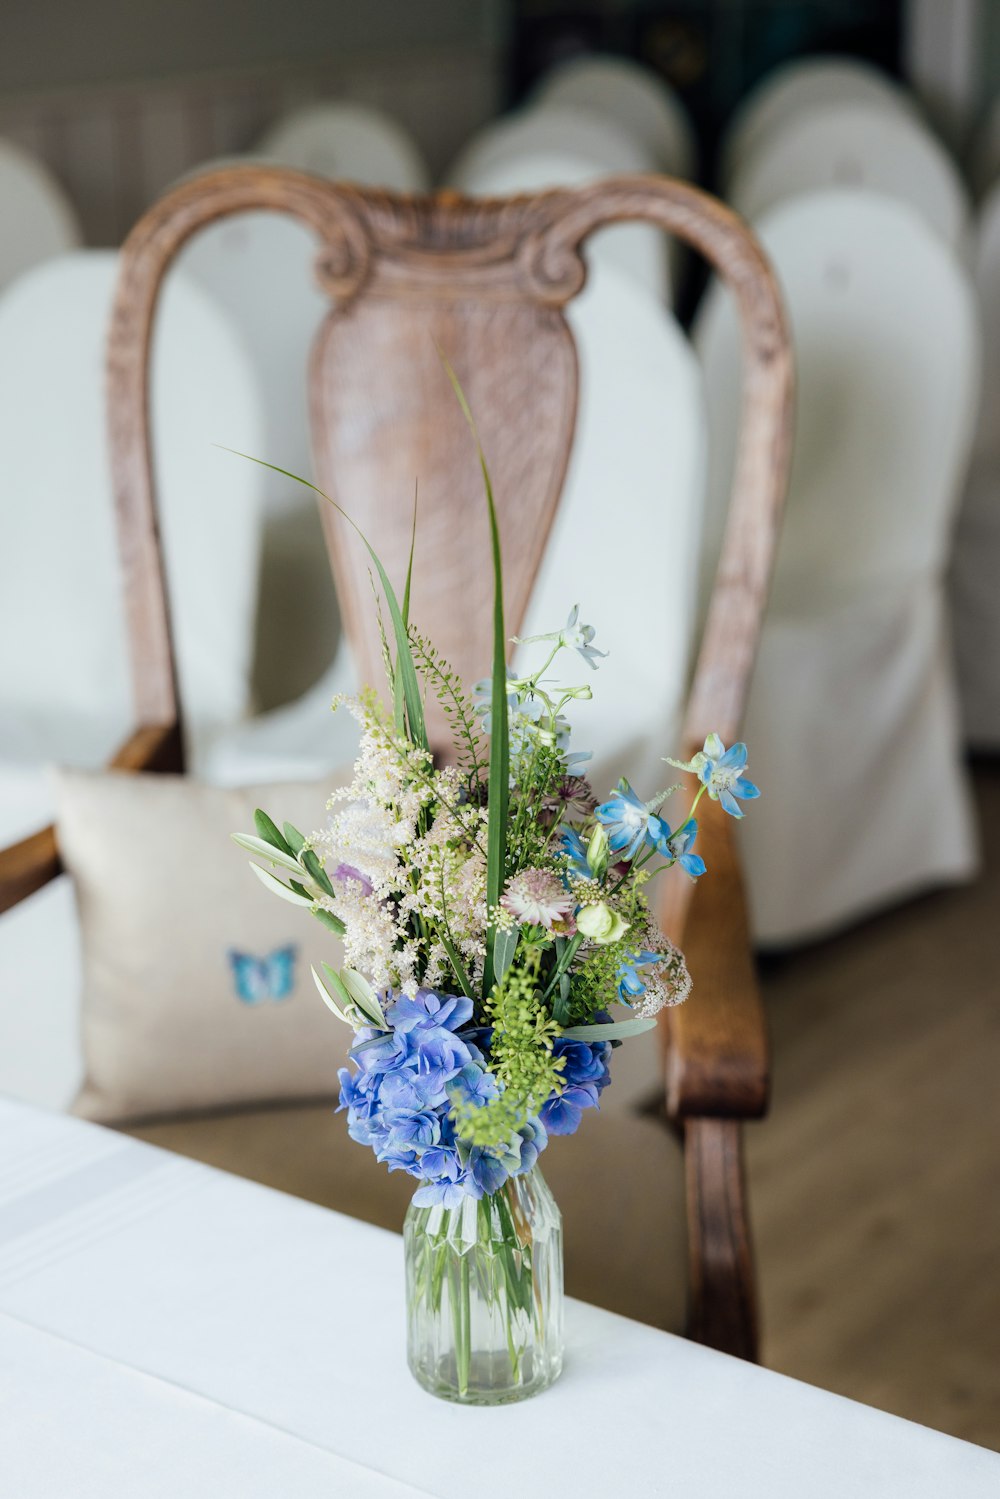 a vase filled with blue and white flowers on top of a table